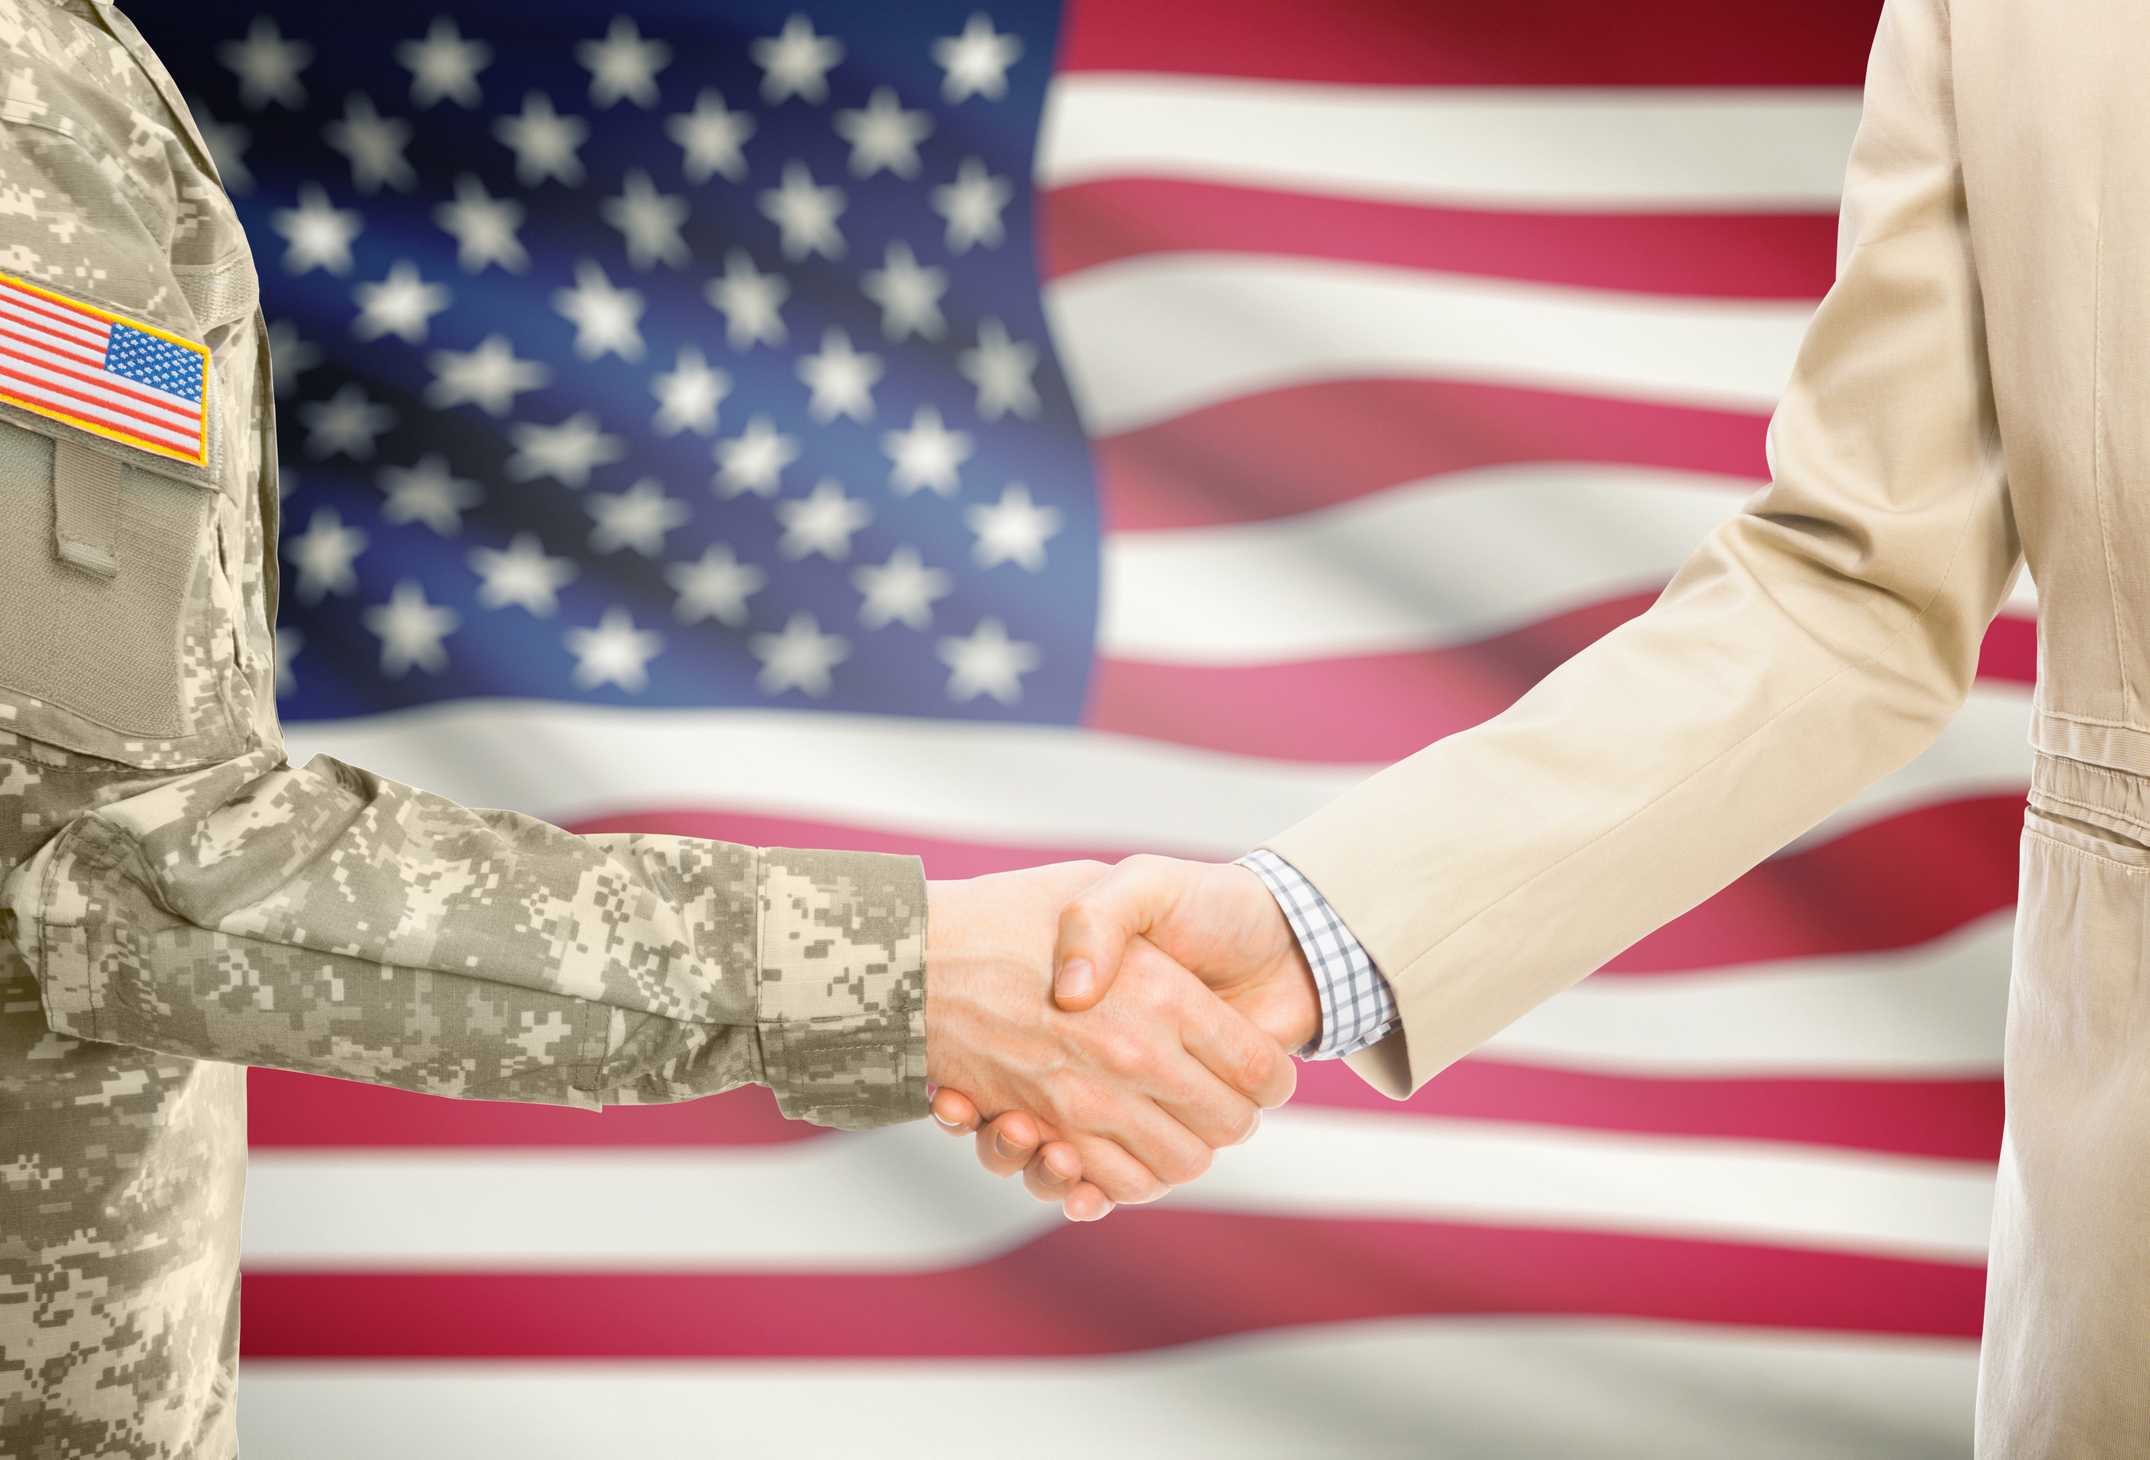 American soldier in uniform and civil man in suit shaking hands in front of a flag.